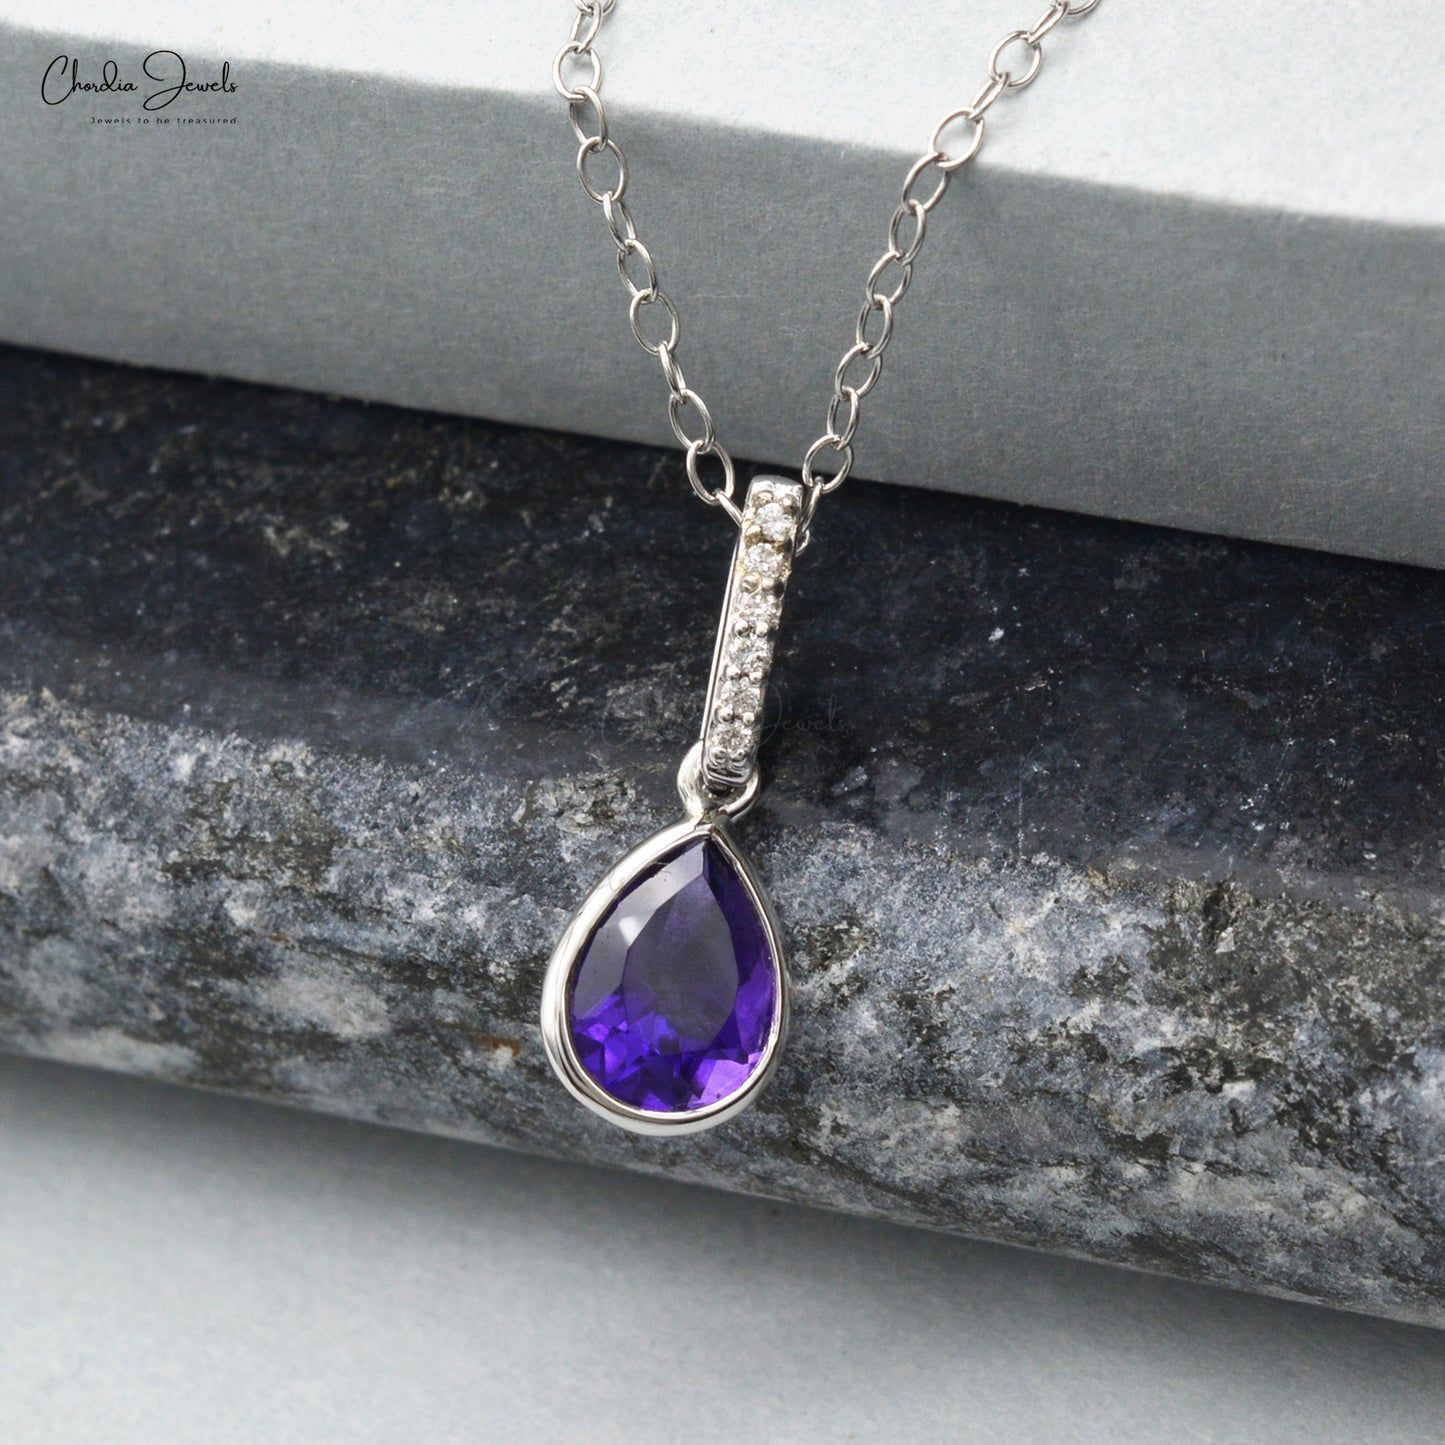 Natural White Diamond and Purple Amethyst Handmade Drop Pendant Necklace in Real 14k White Gold Valentine's Day Gift